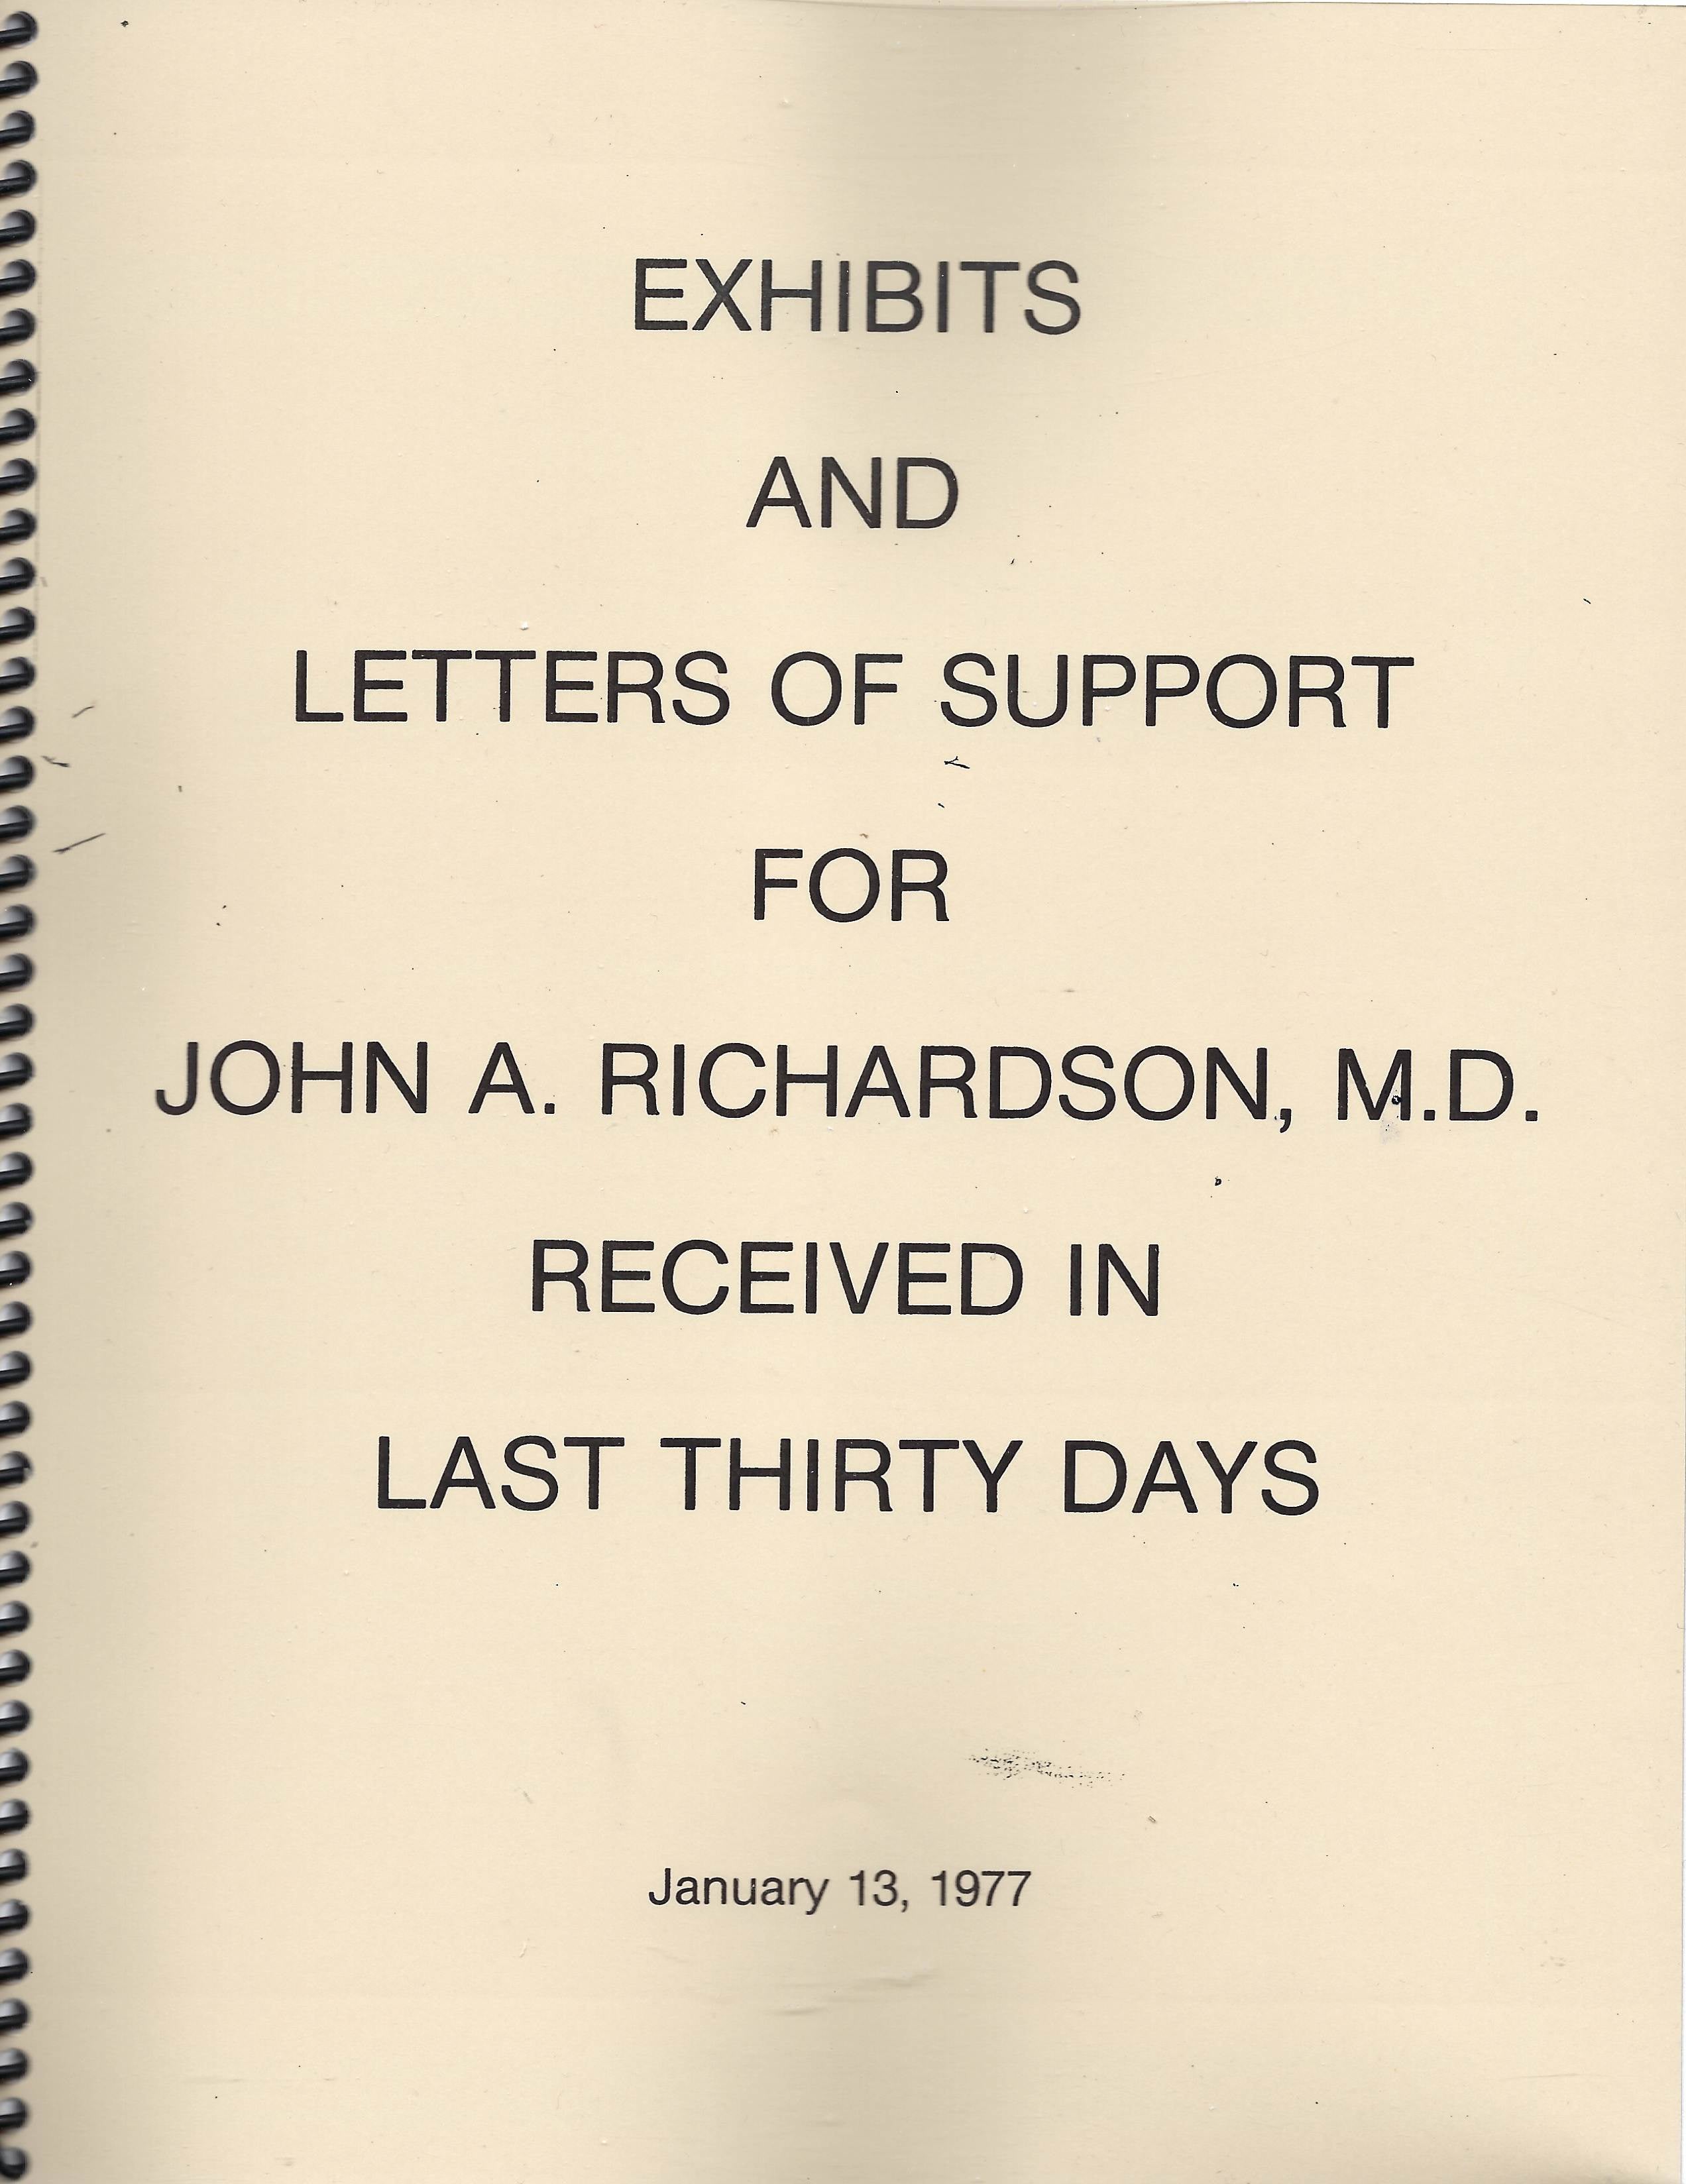 (PDF) Exhibits and Letters of Support for John A. Richardson, MD Received in Last Thirty Days-1-13-1977-v1 (134 pages)